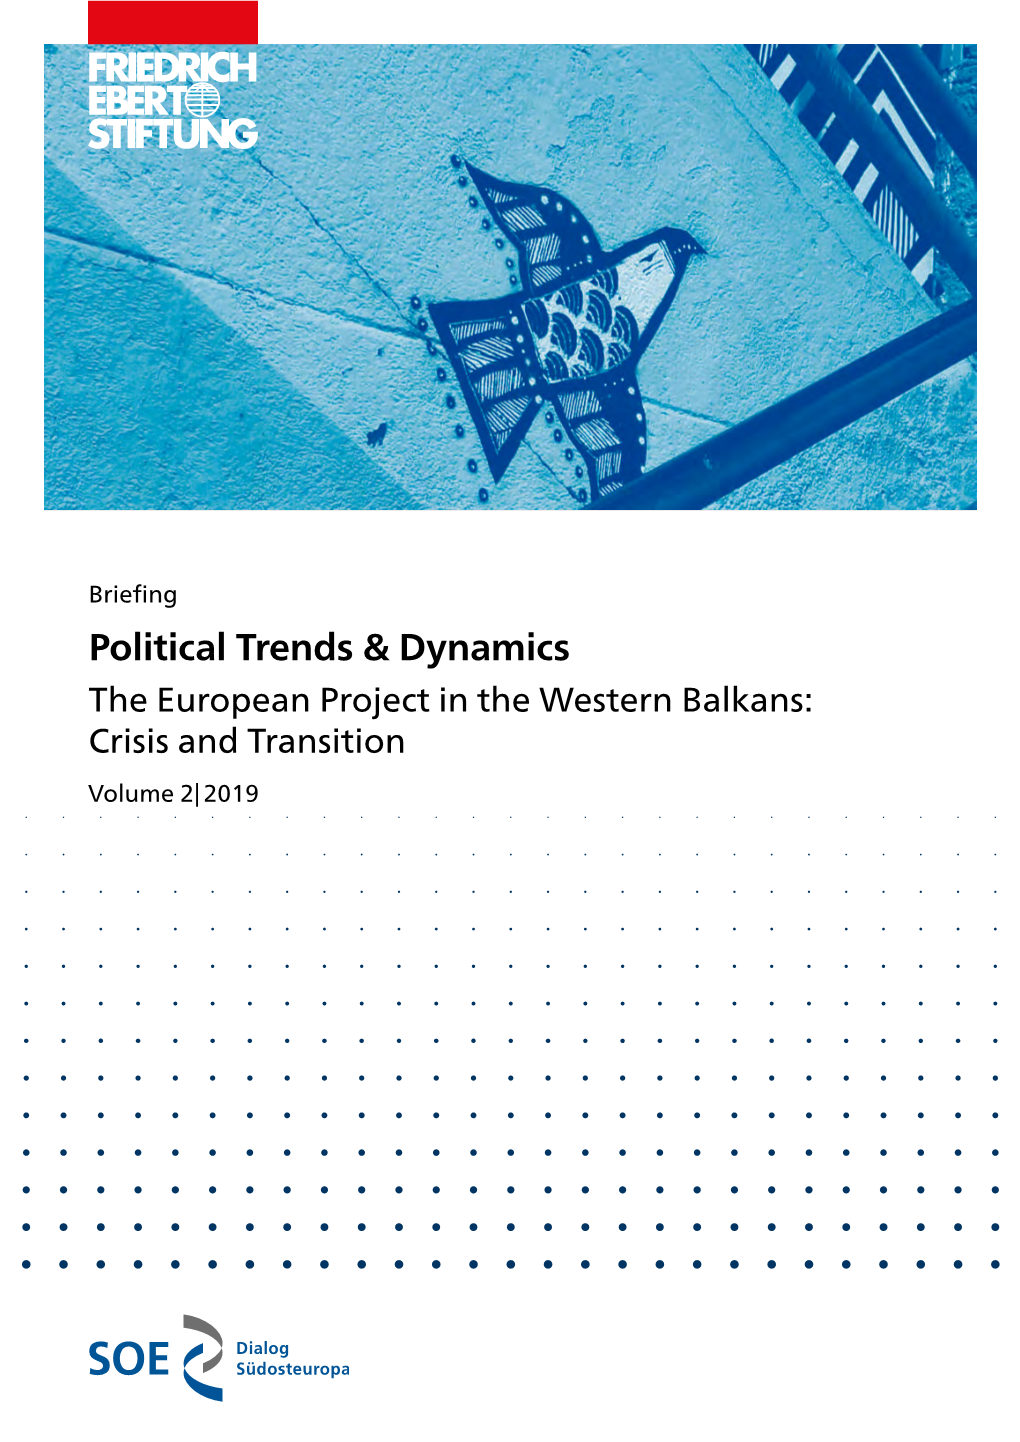 The EU and the Western Balkans